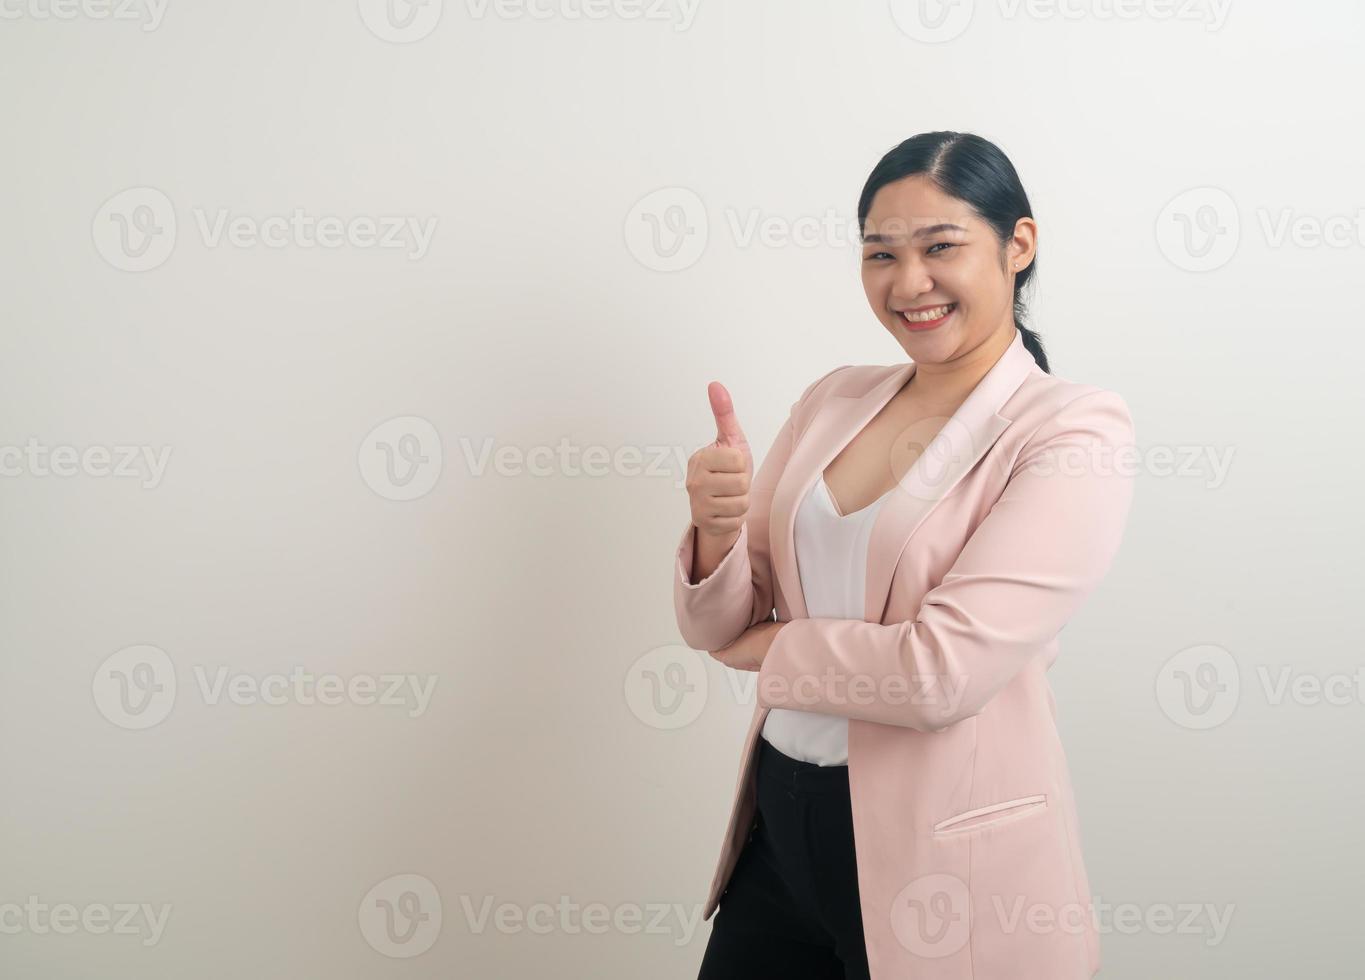 Asian woman with thumb up white background photo